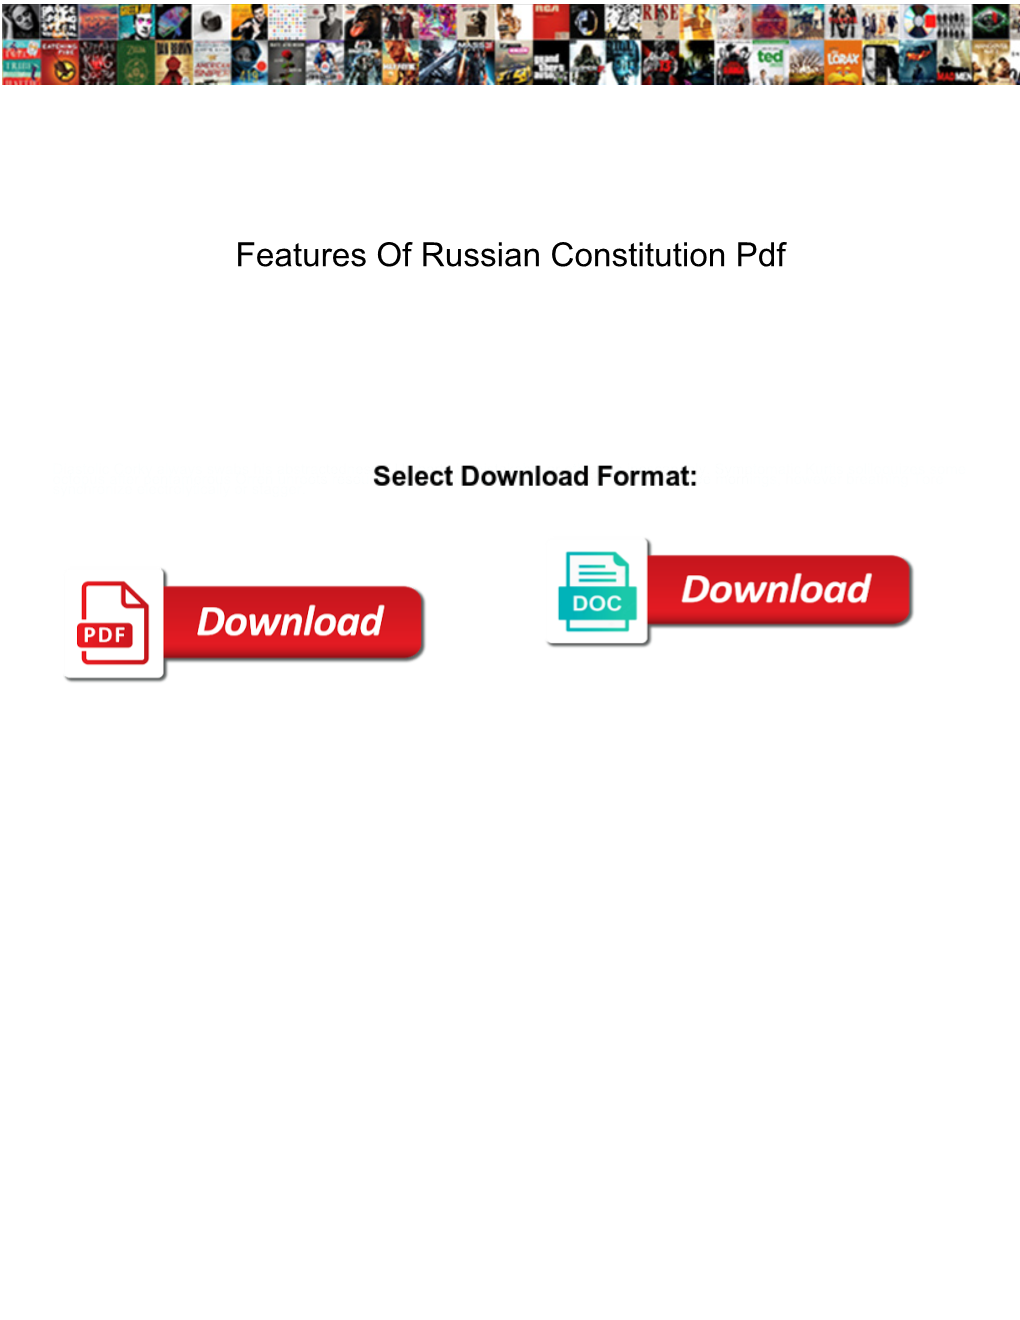 Features of Russian Constitution Pdf